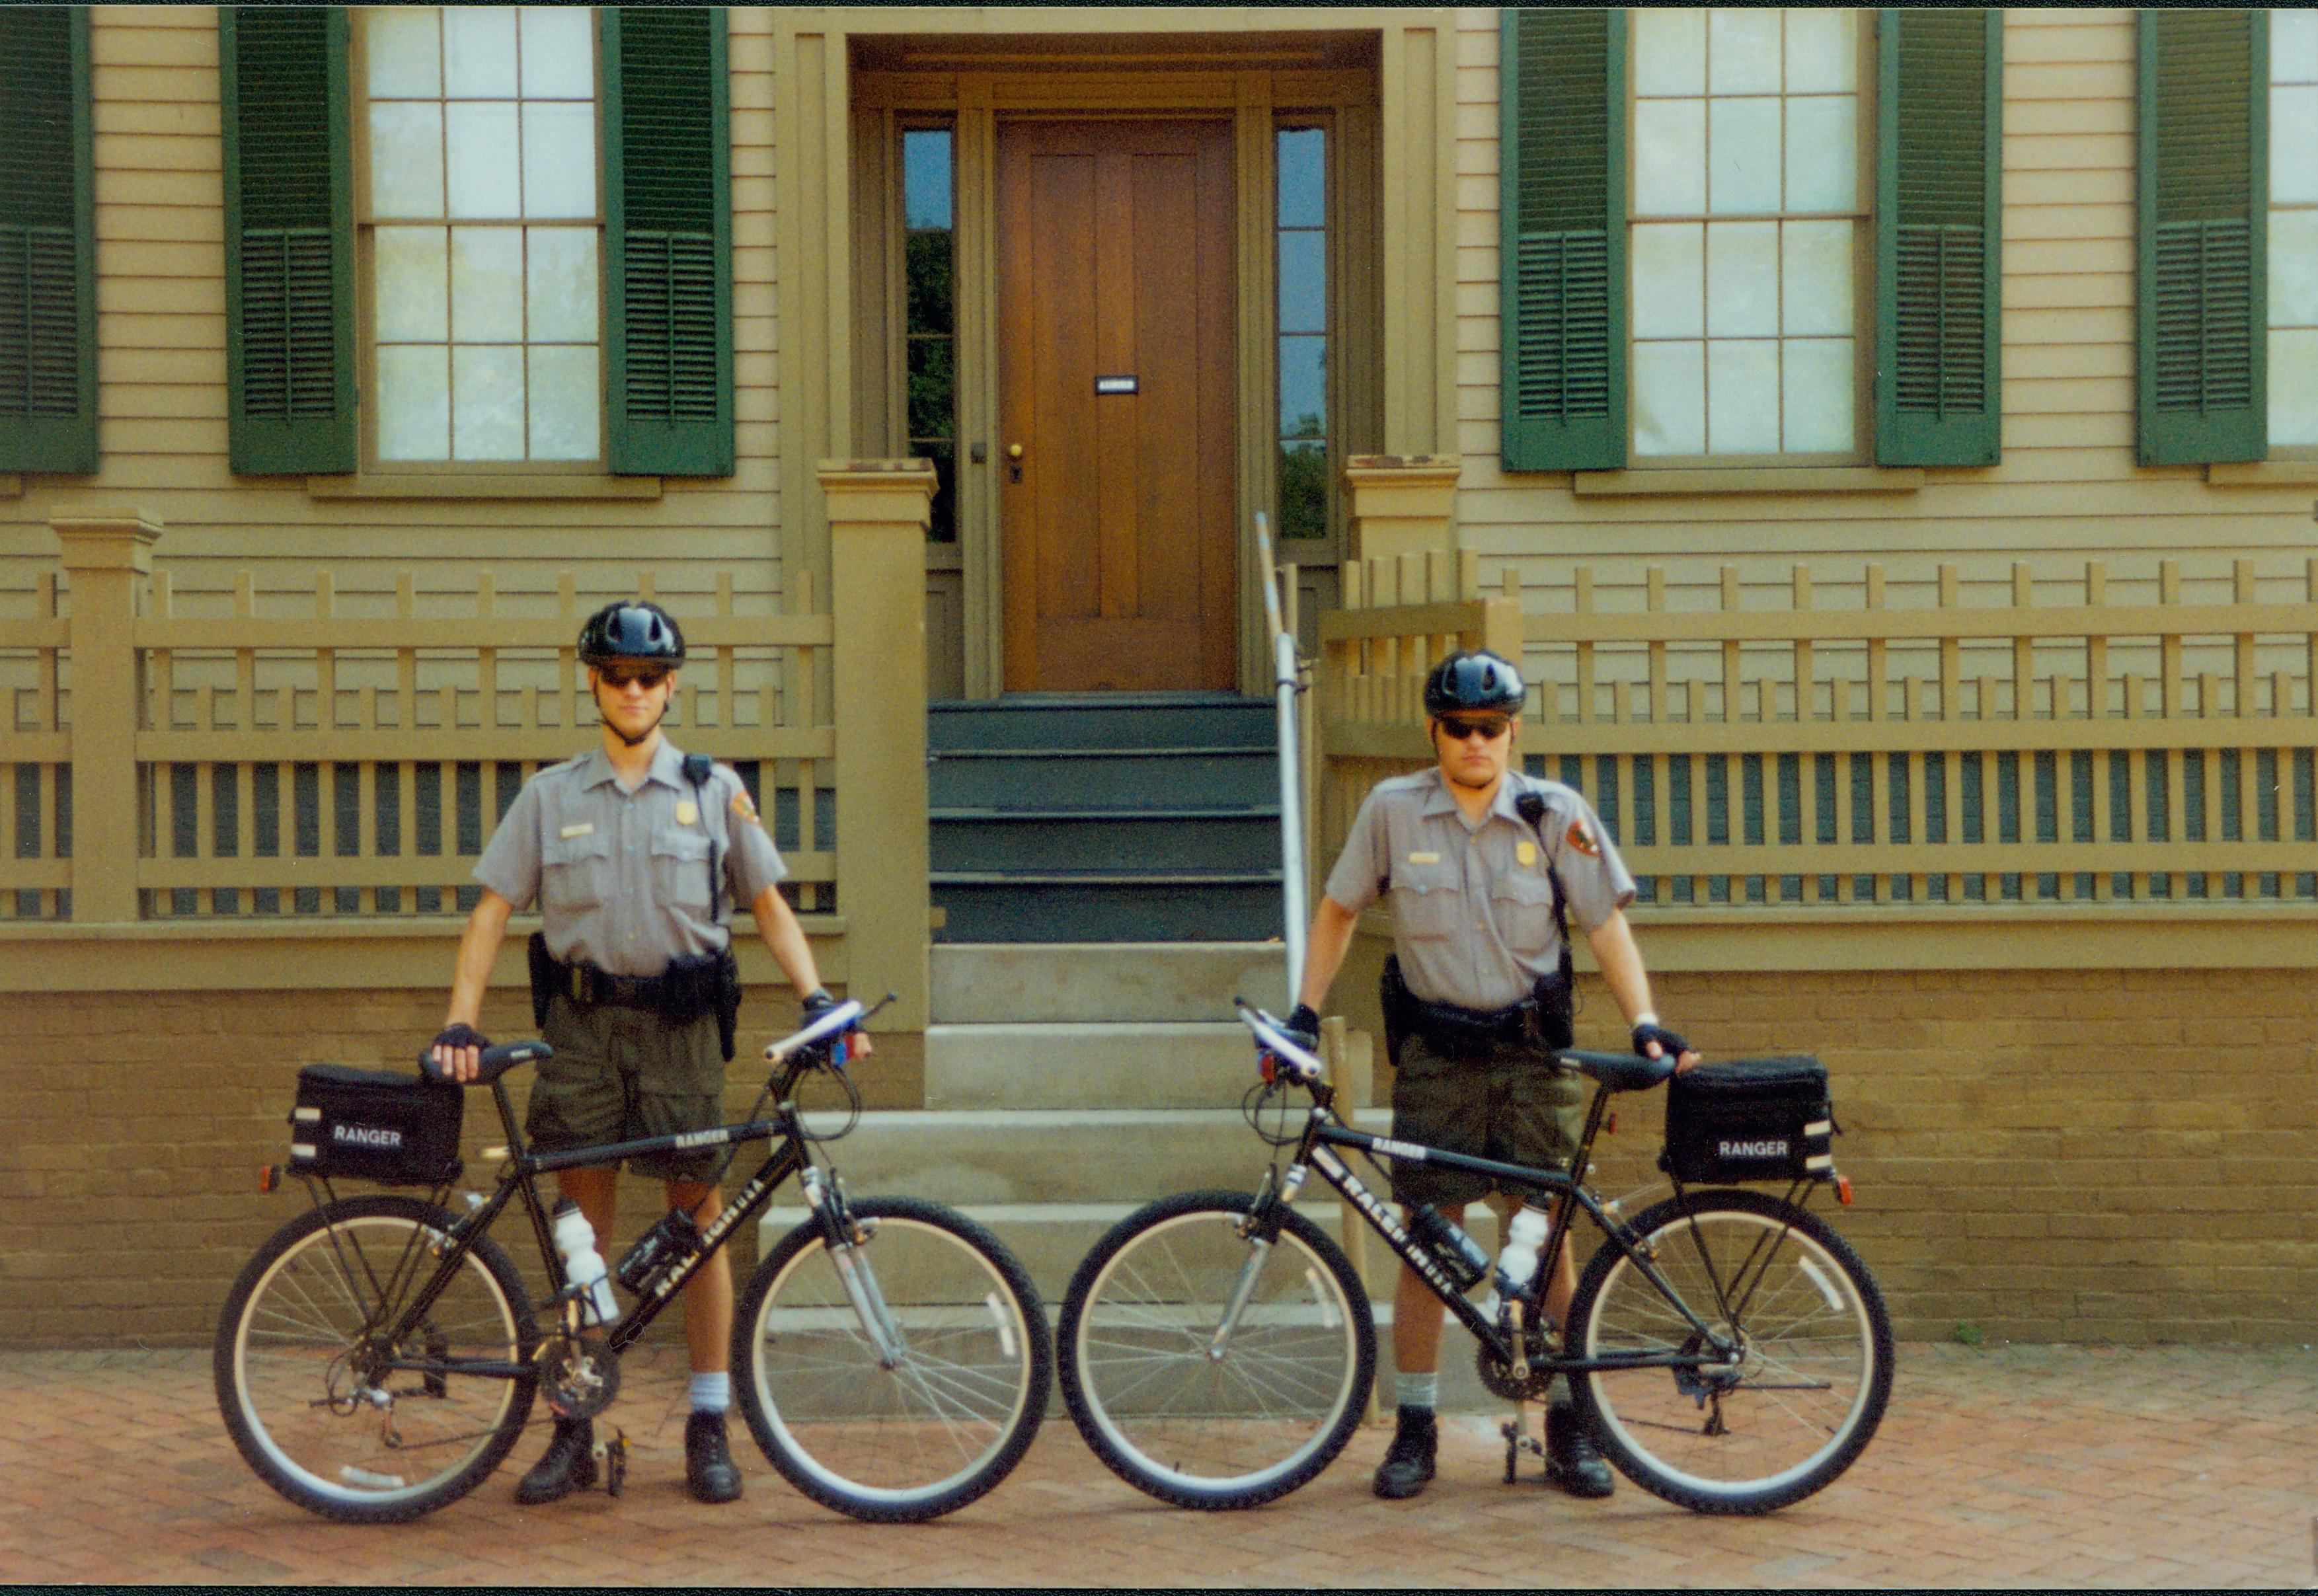 Two law enforcement rangers stand in front of the Lincoln Home with their patrol bicycles. Ranger Jeff Budny stands on the left, while Ranger Rodney Naylor stands to the right. Photographer facing east.